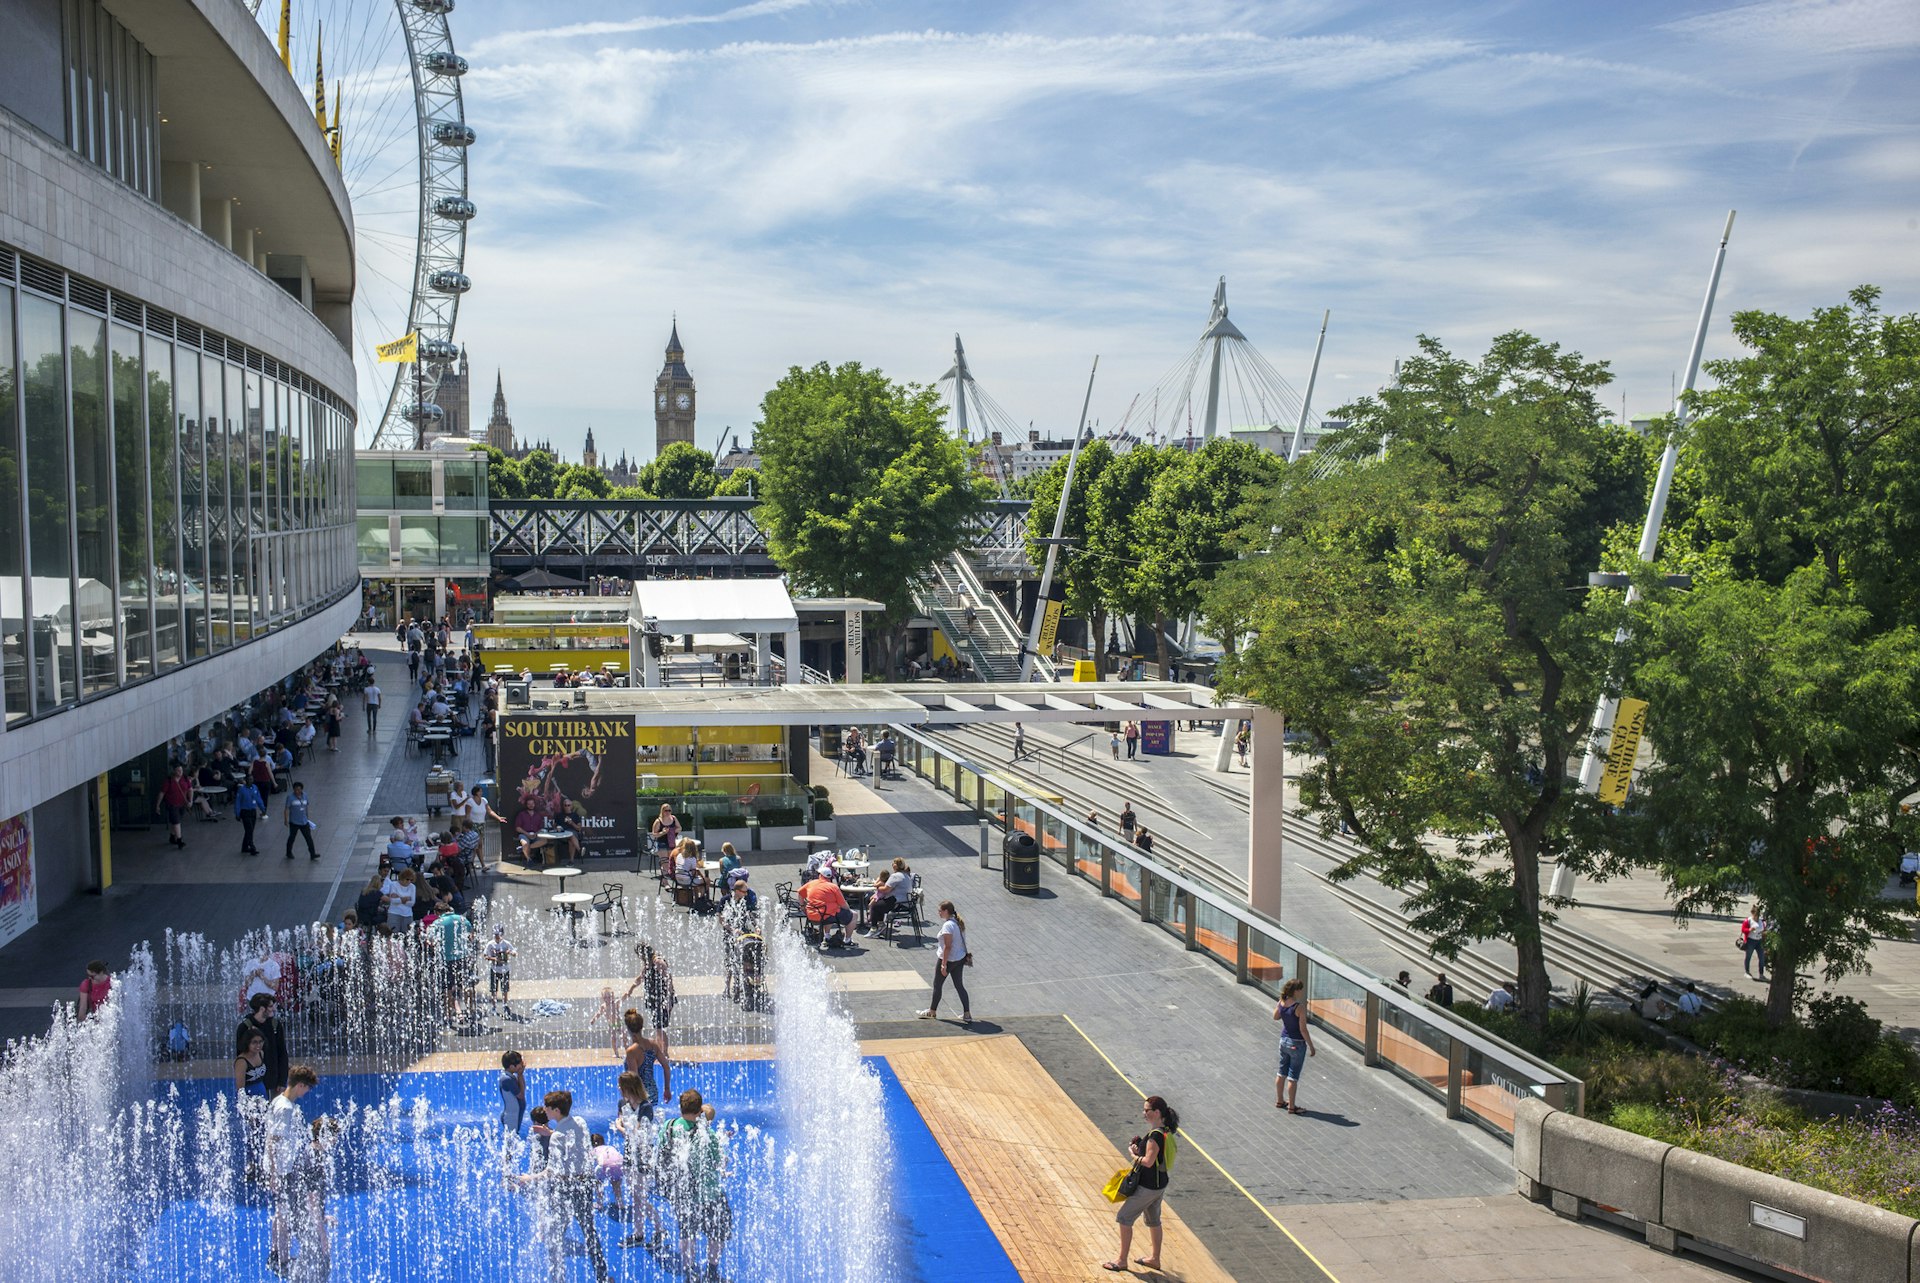 Children splash in a fountain outside the Southbank Centre on a summer's day in London